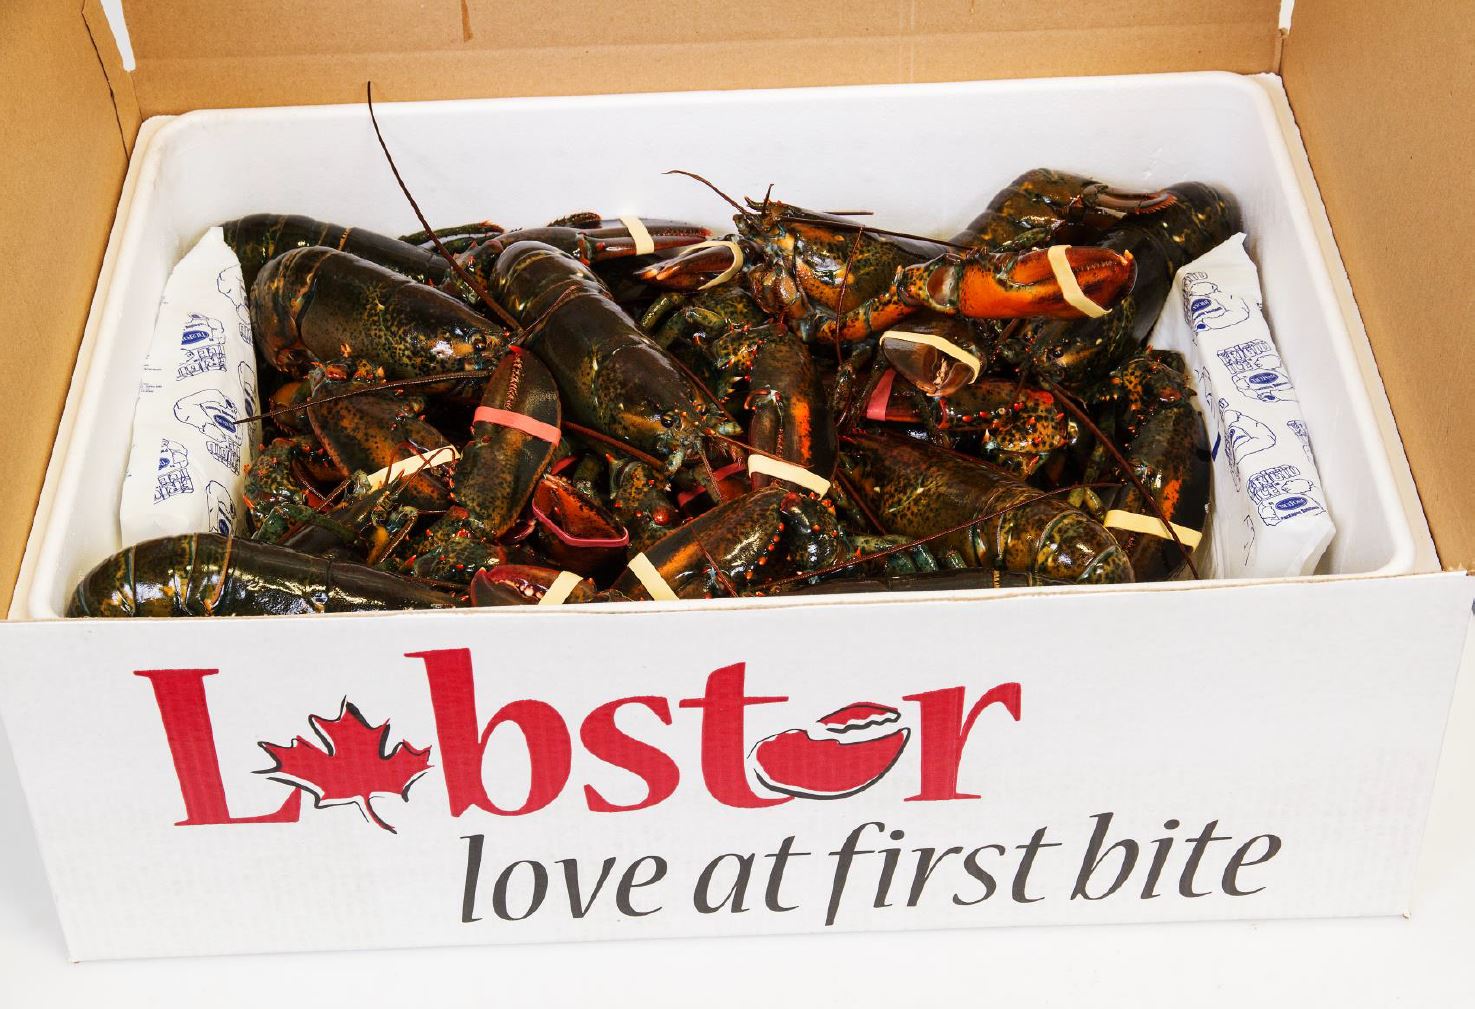 Tangier Lobster - Lobster packed in styro box